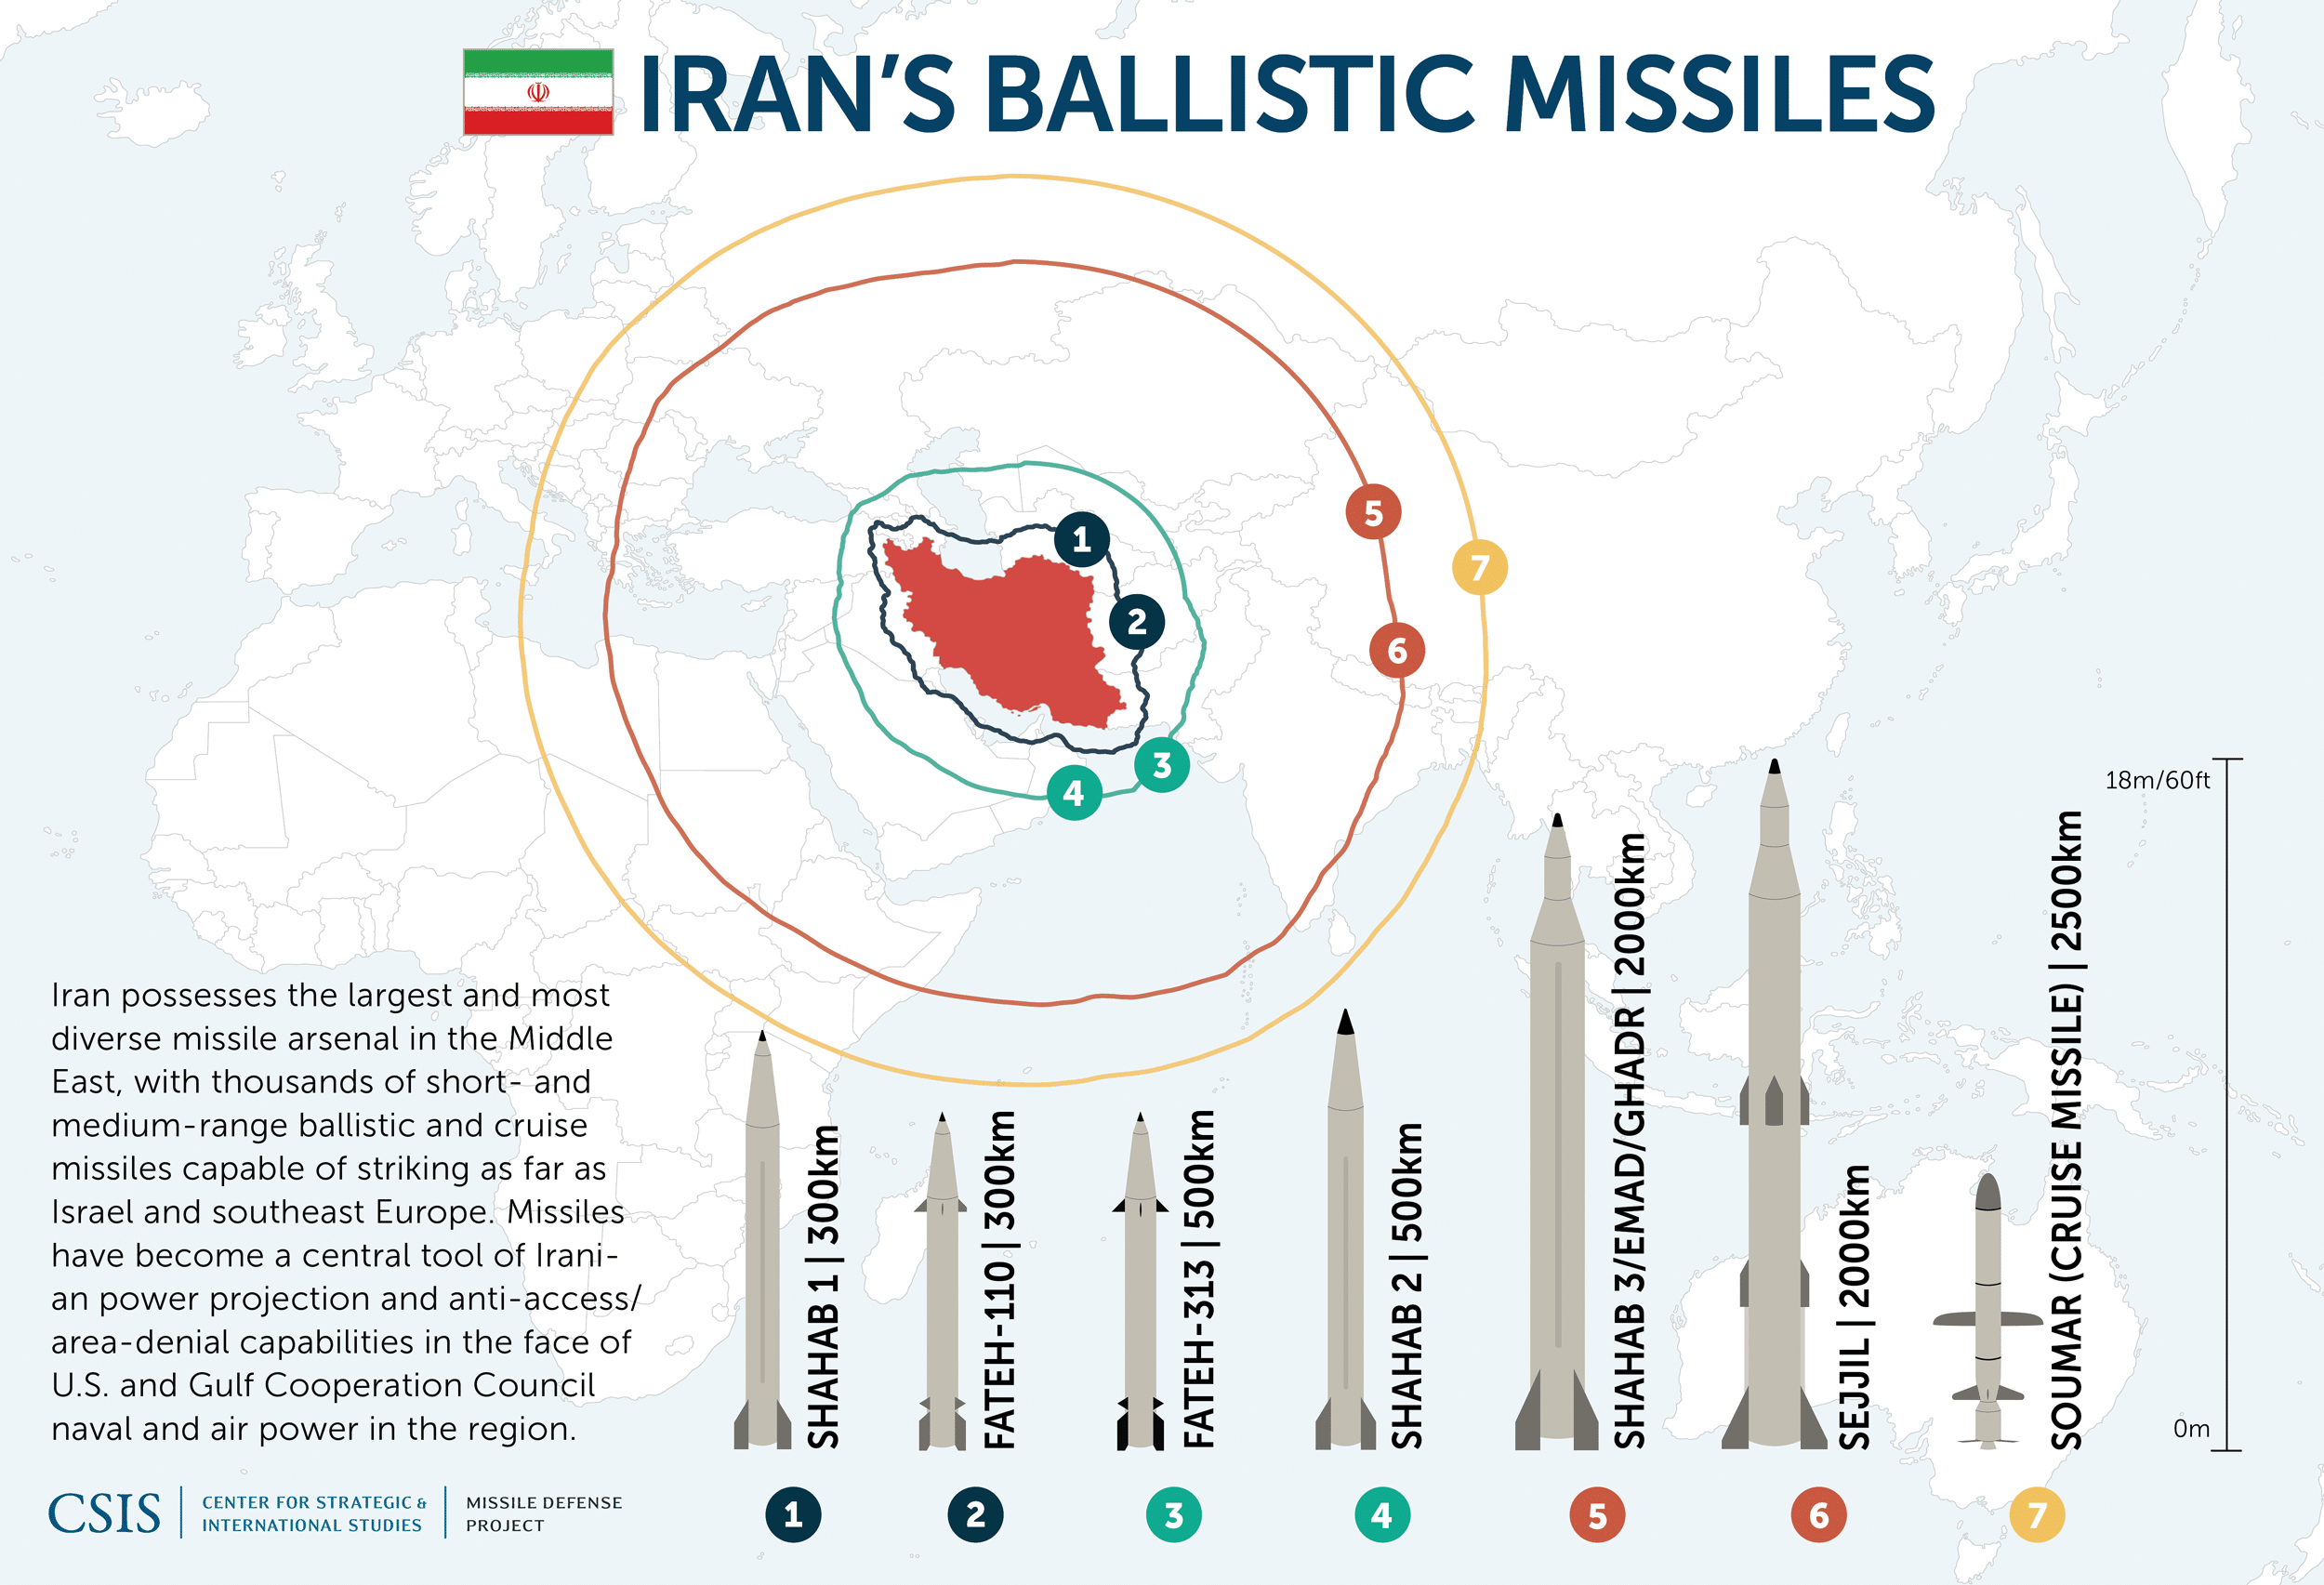 IranMissiles_update_06.png